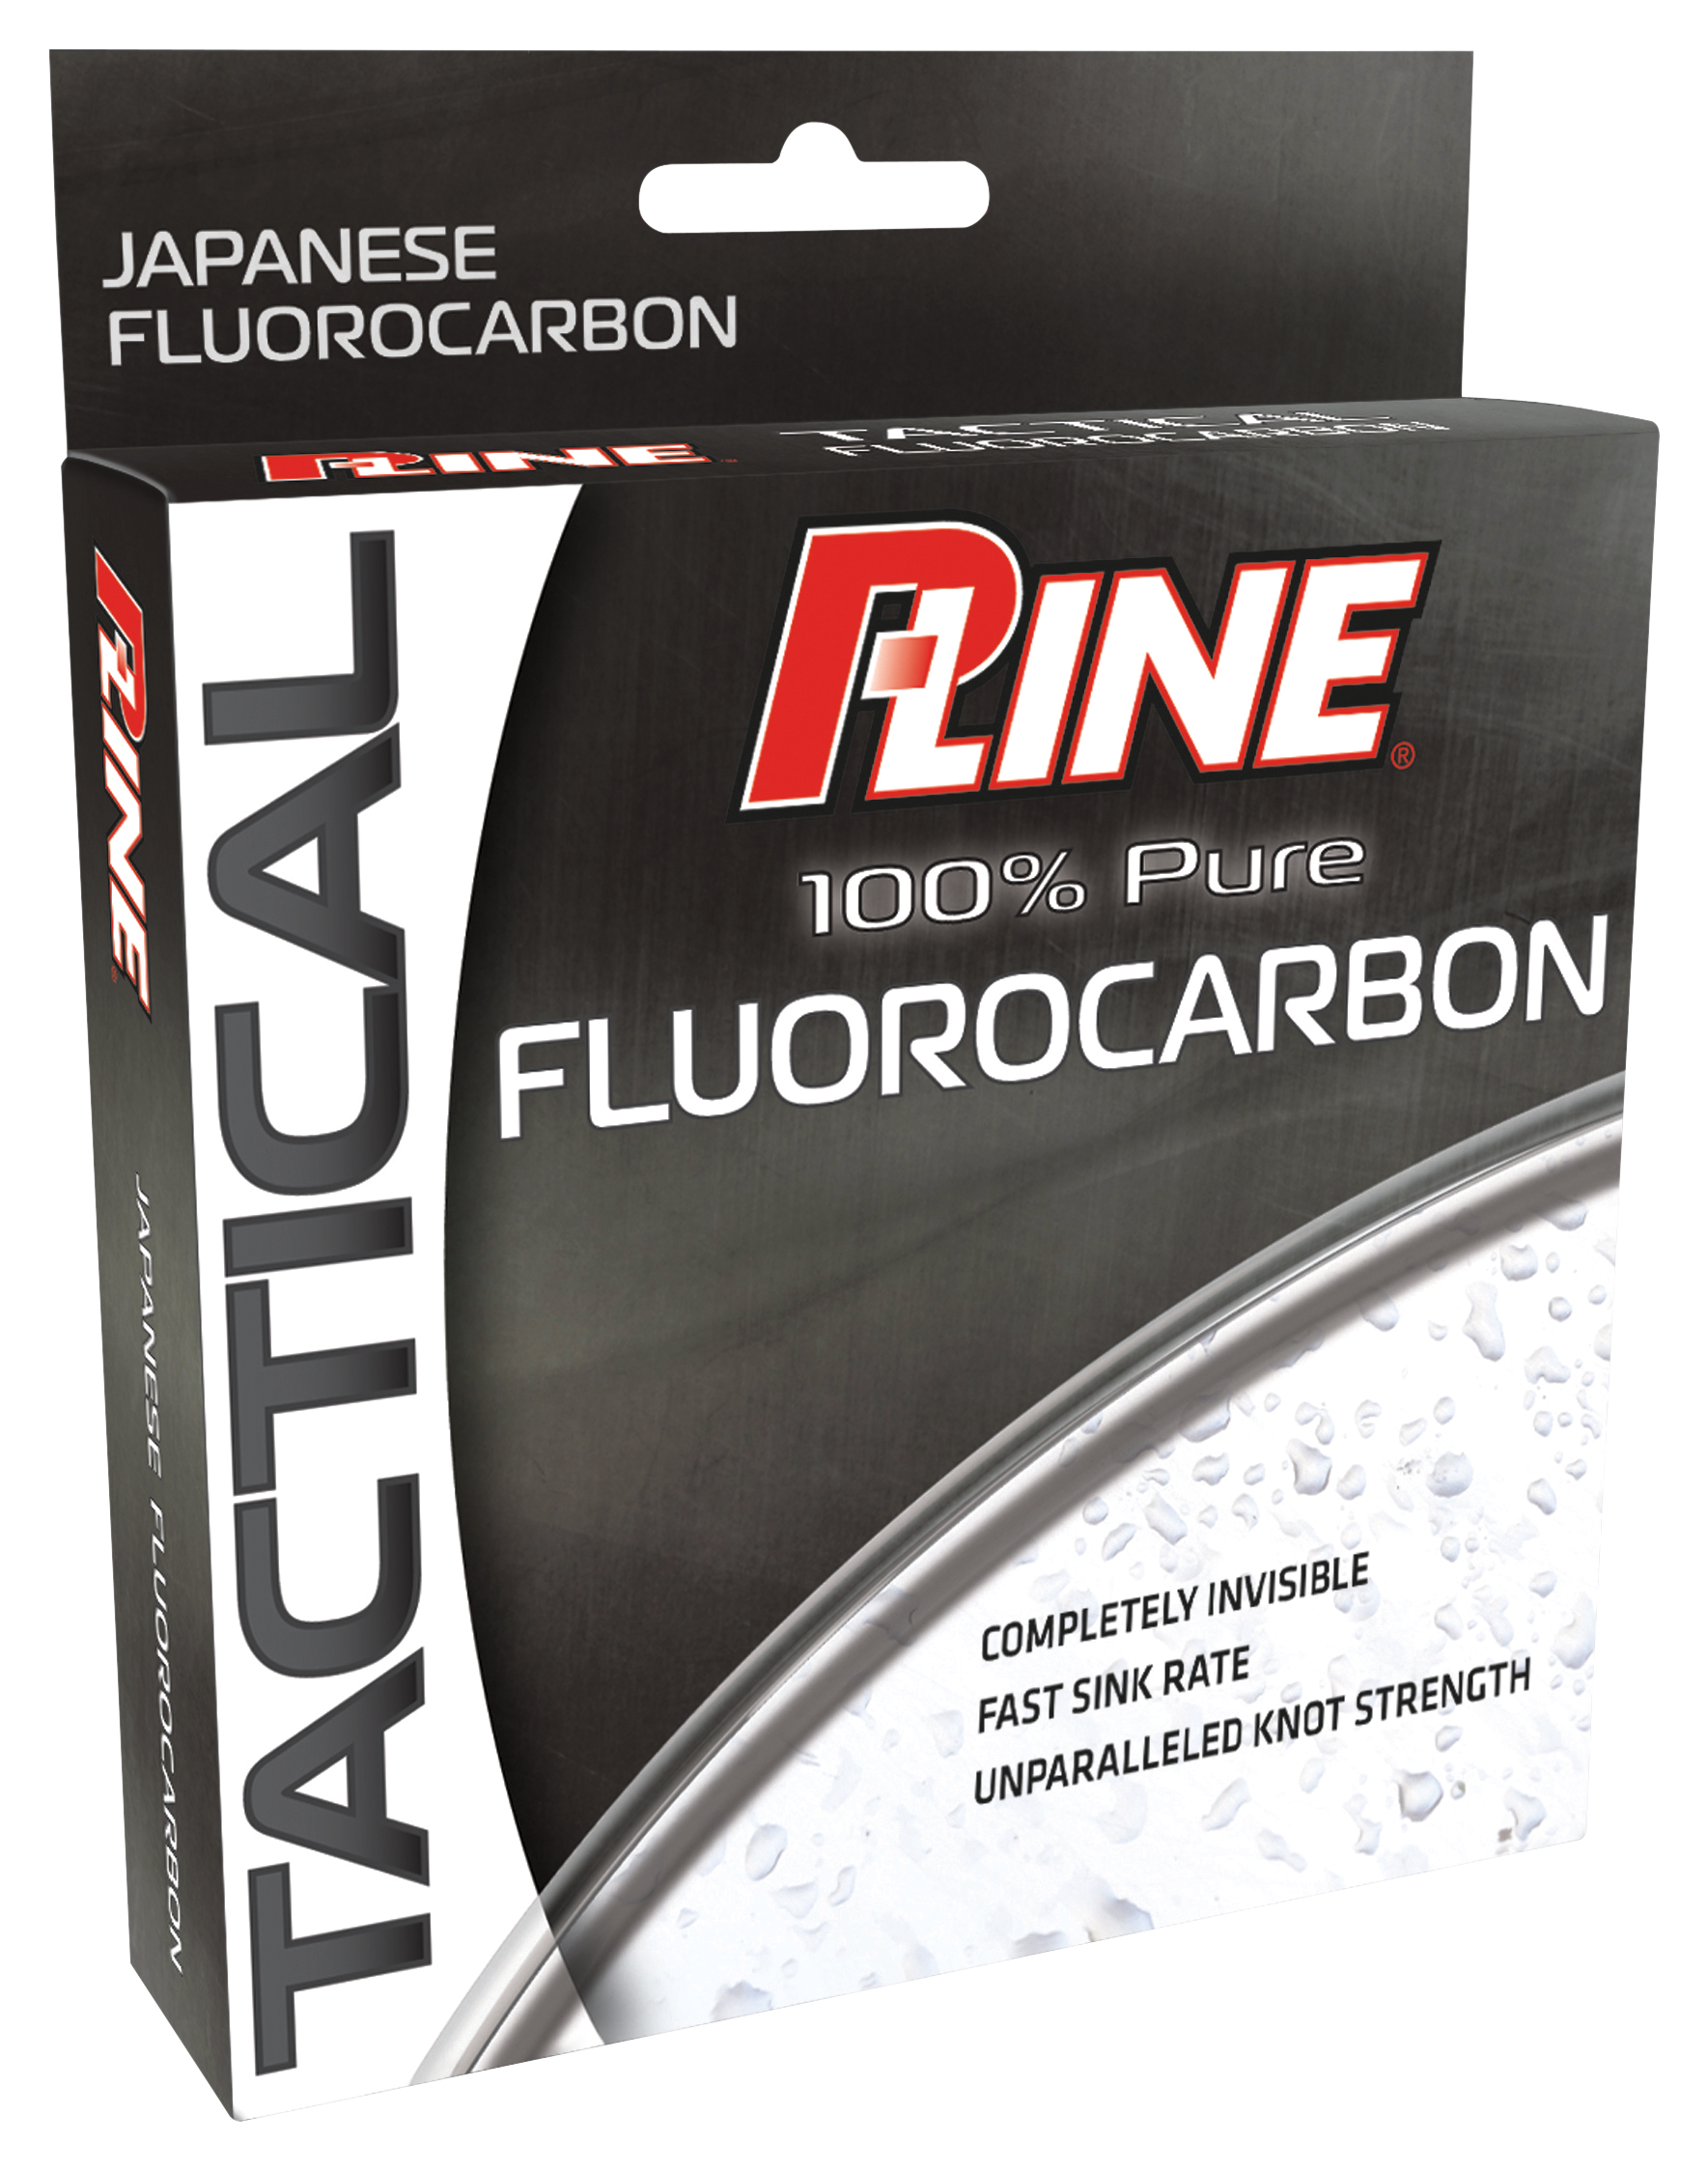 P-Line Soft Fluorocarbon Line 100% Fluorocarbon 250yd 12lb - American  Legacy Fishing, G Loomis Superstore